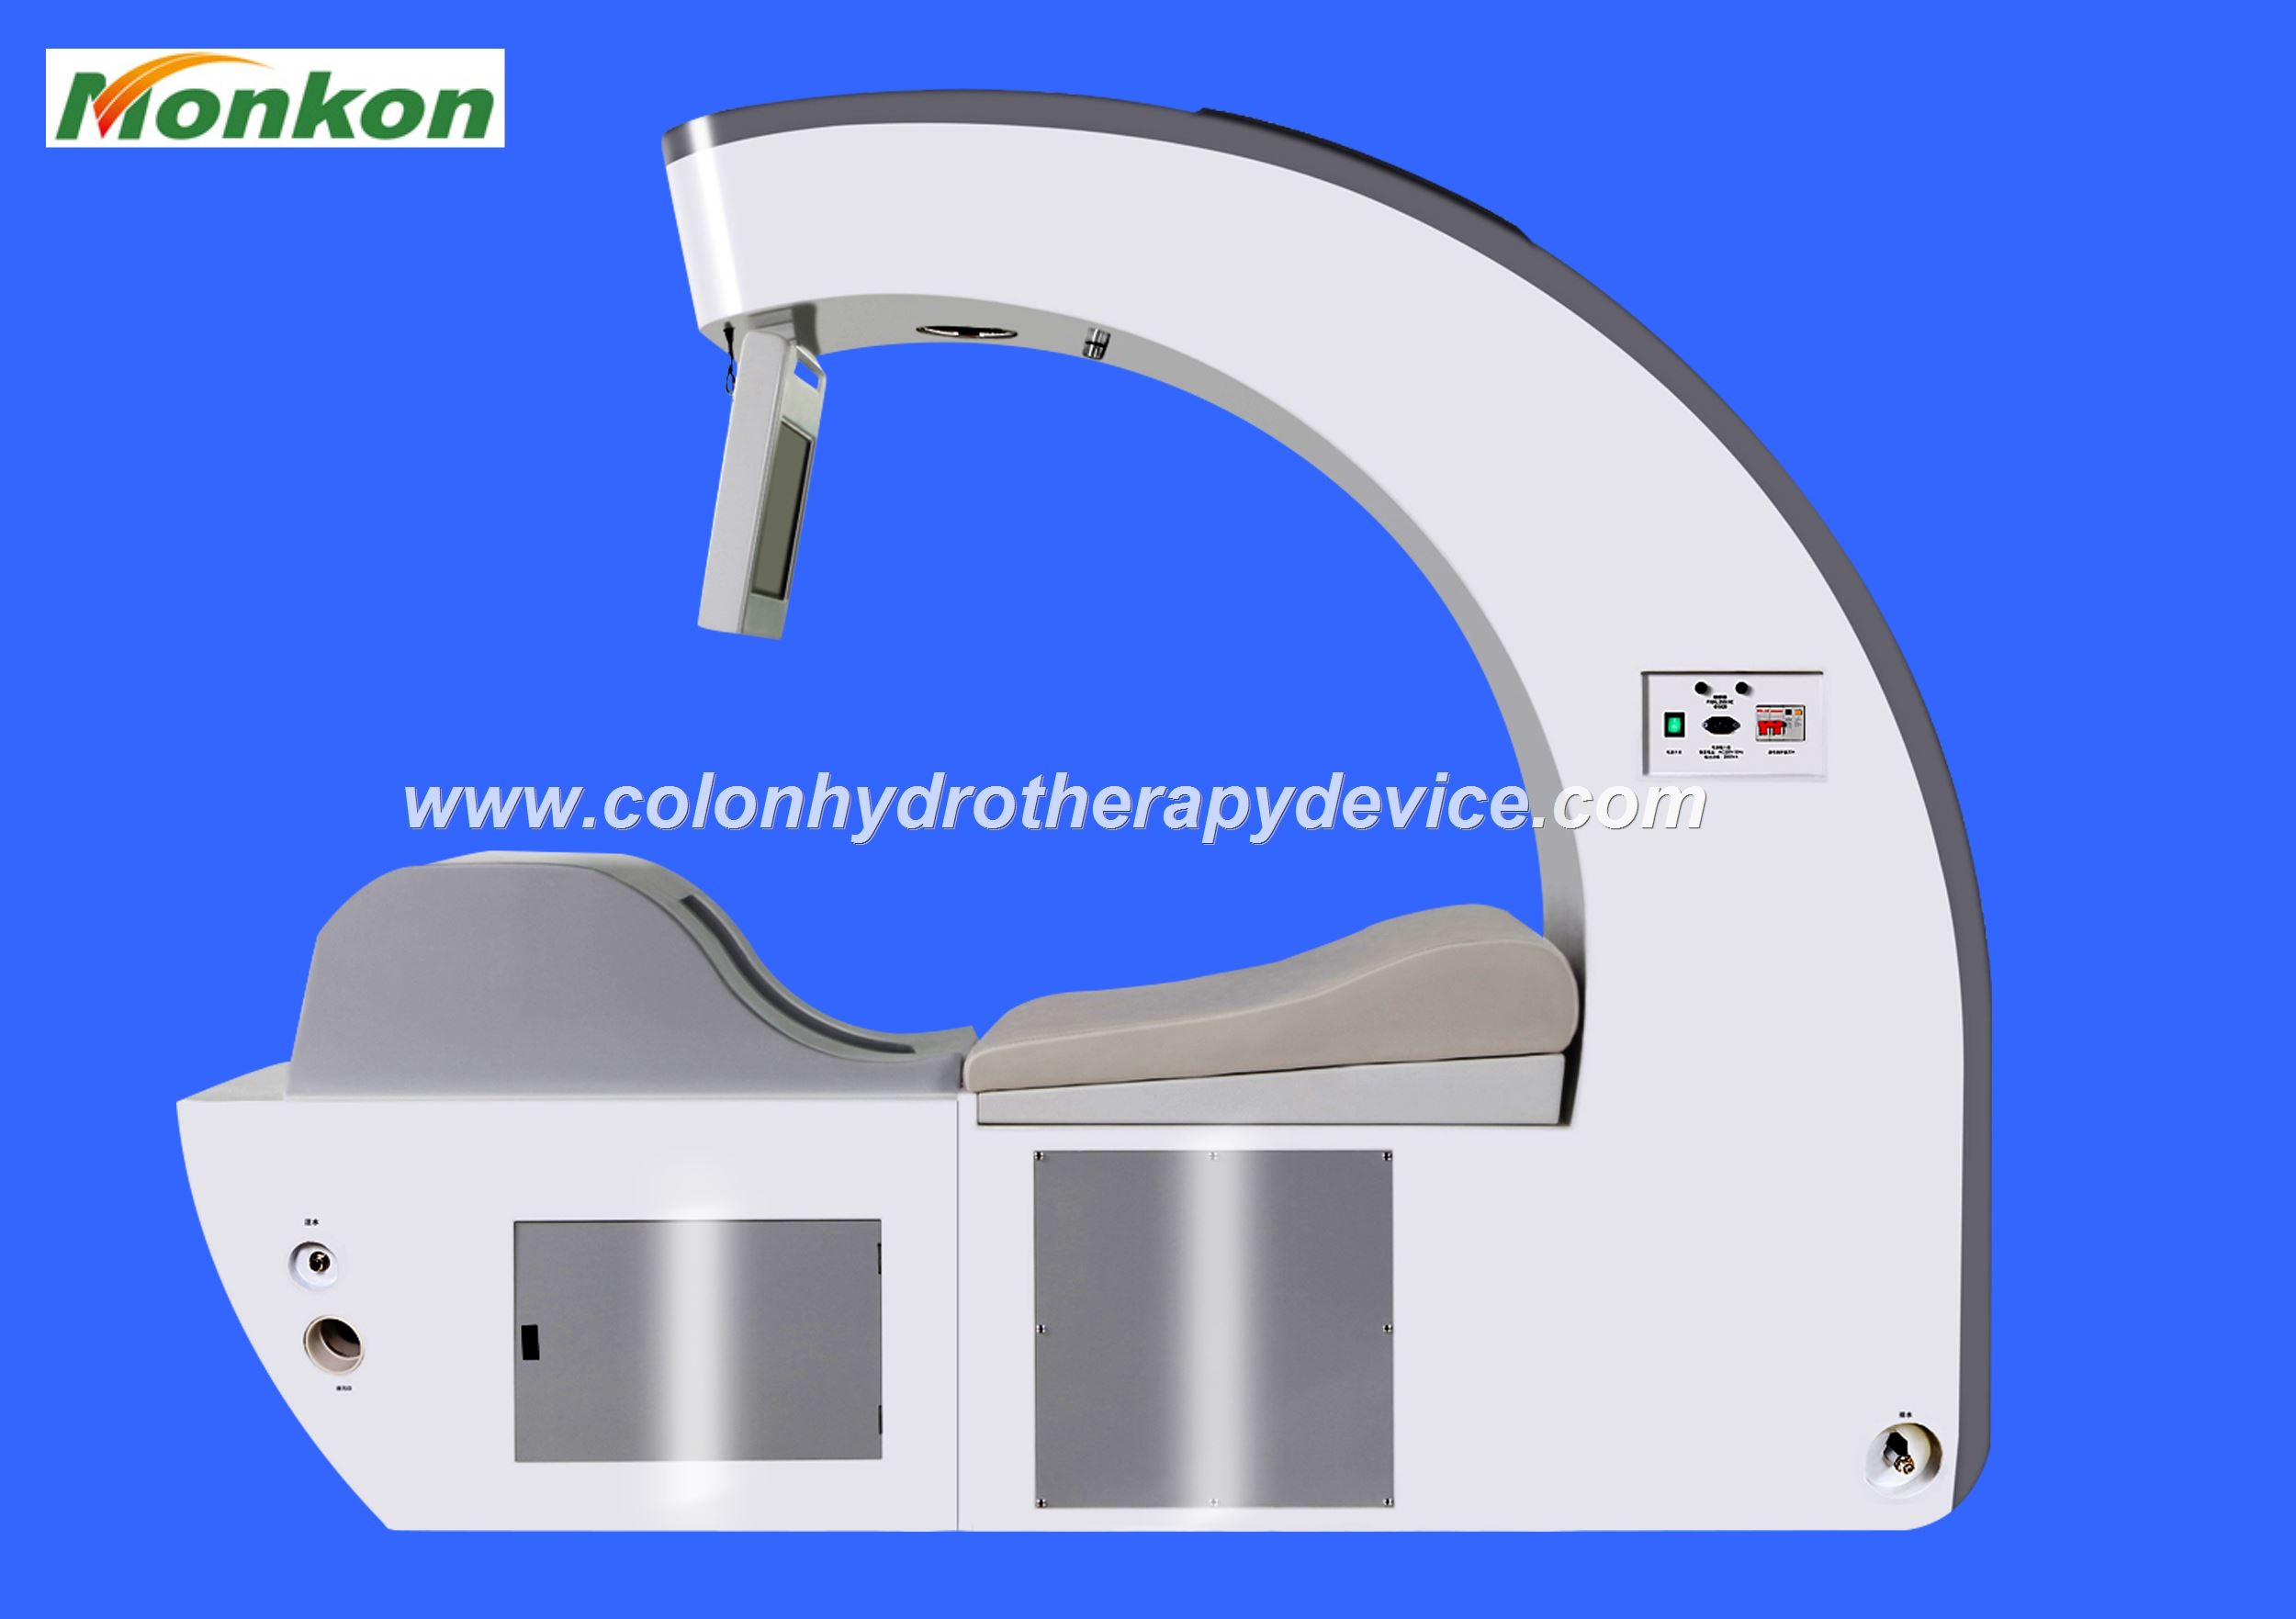 Colon Hydrotherapy Devices